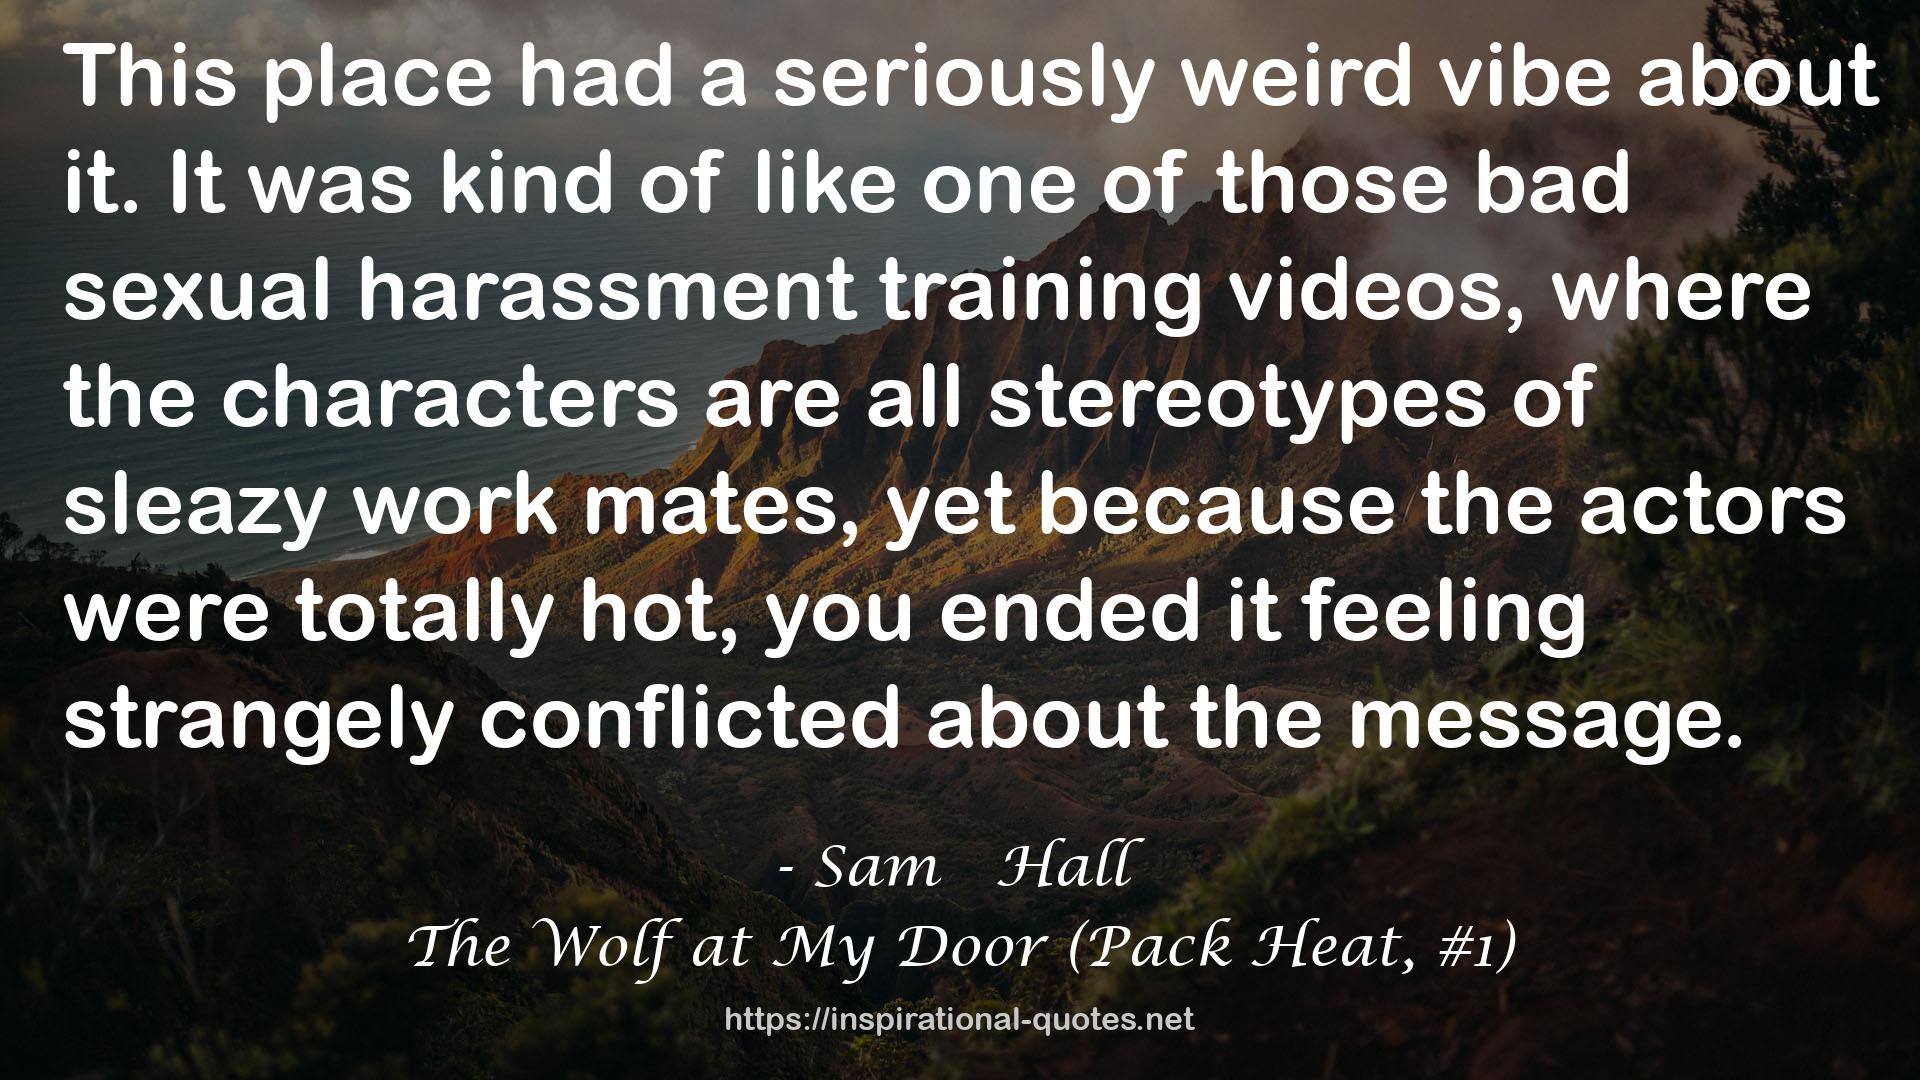 The Wolf at My Door (Pack Heat, #1) QUOTES